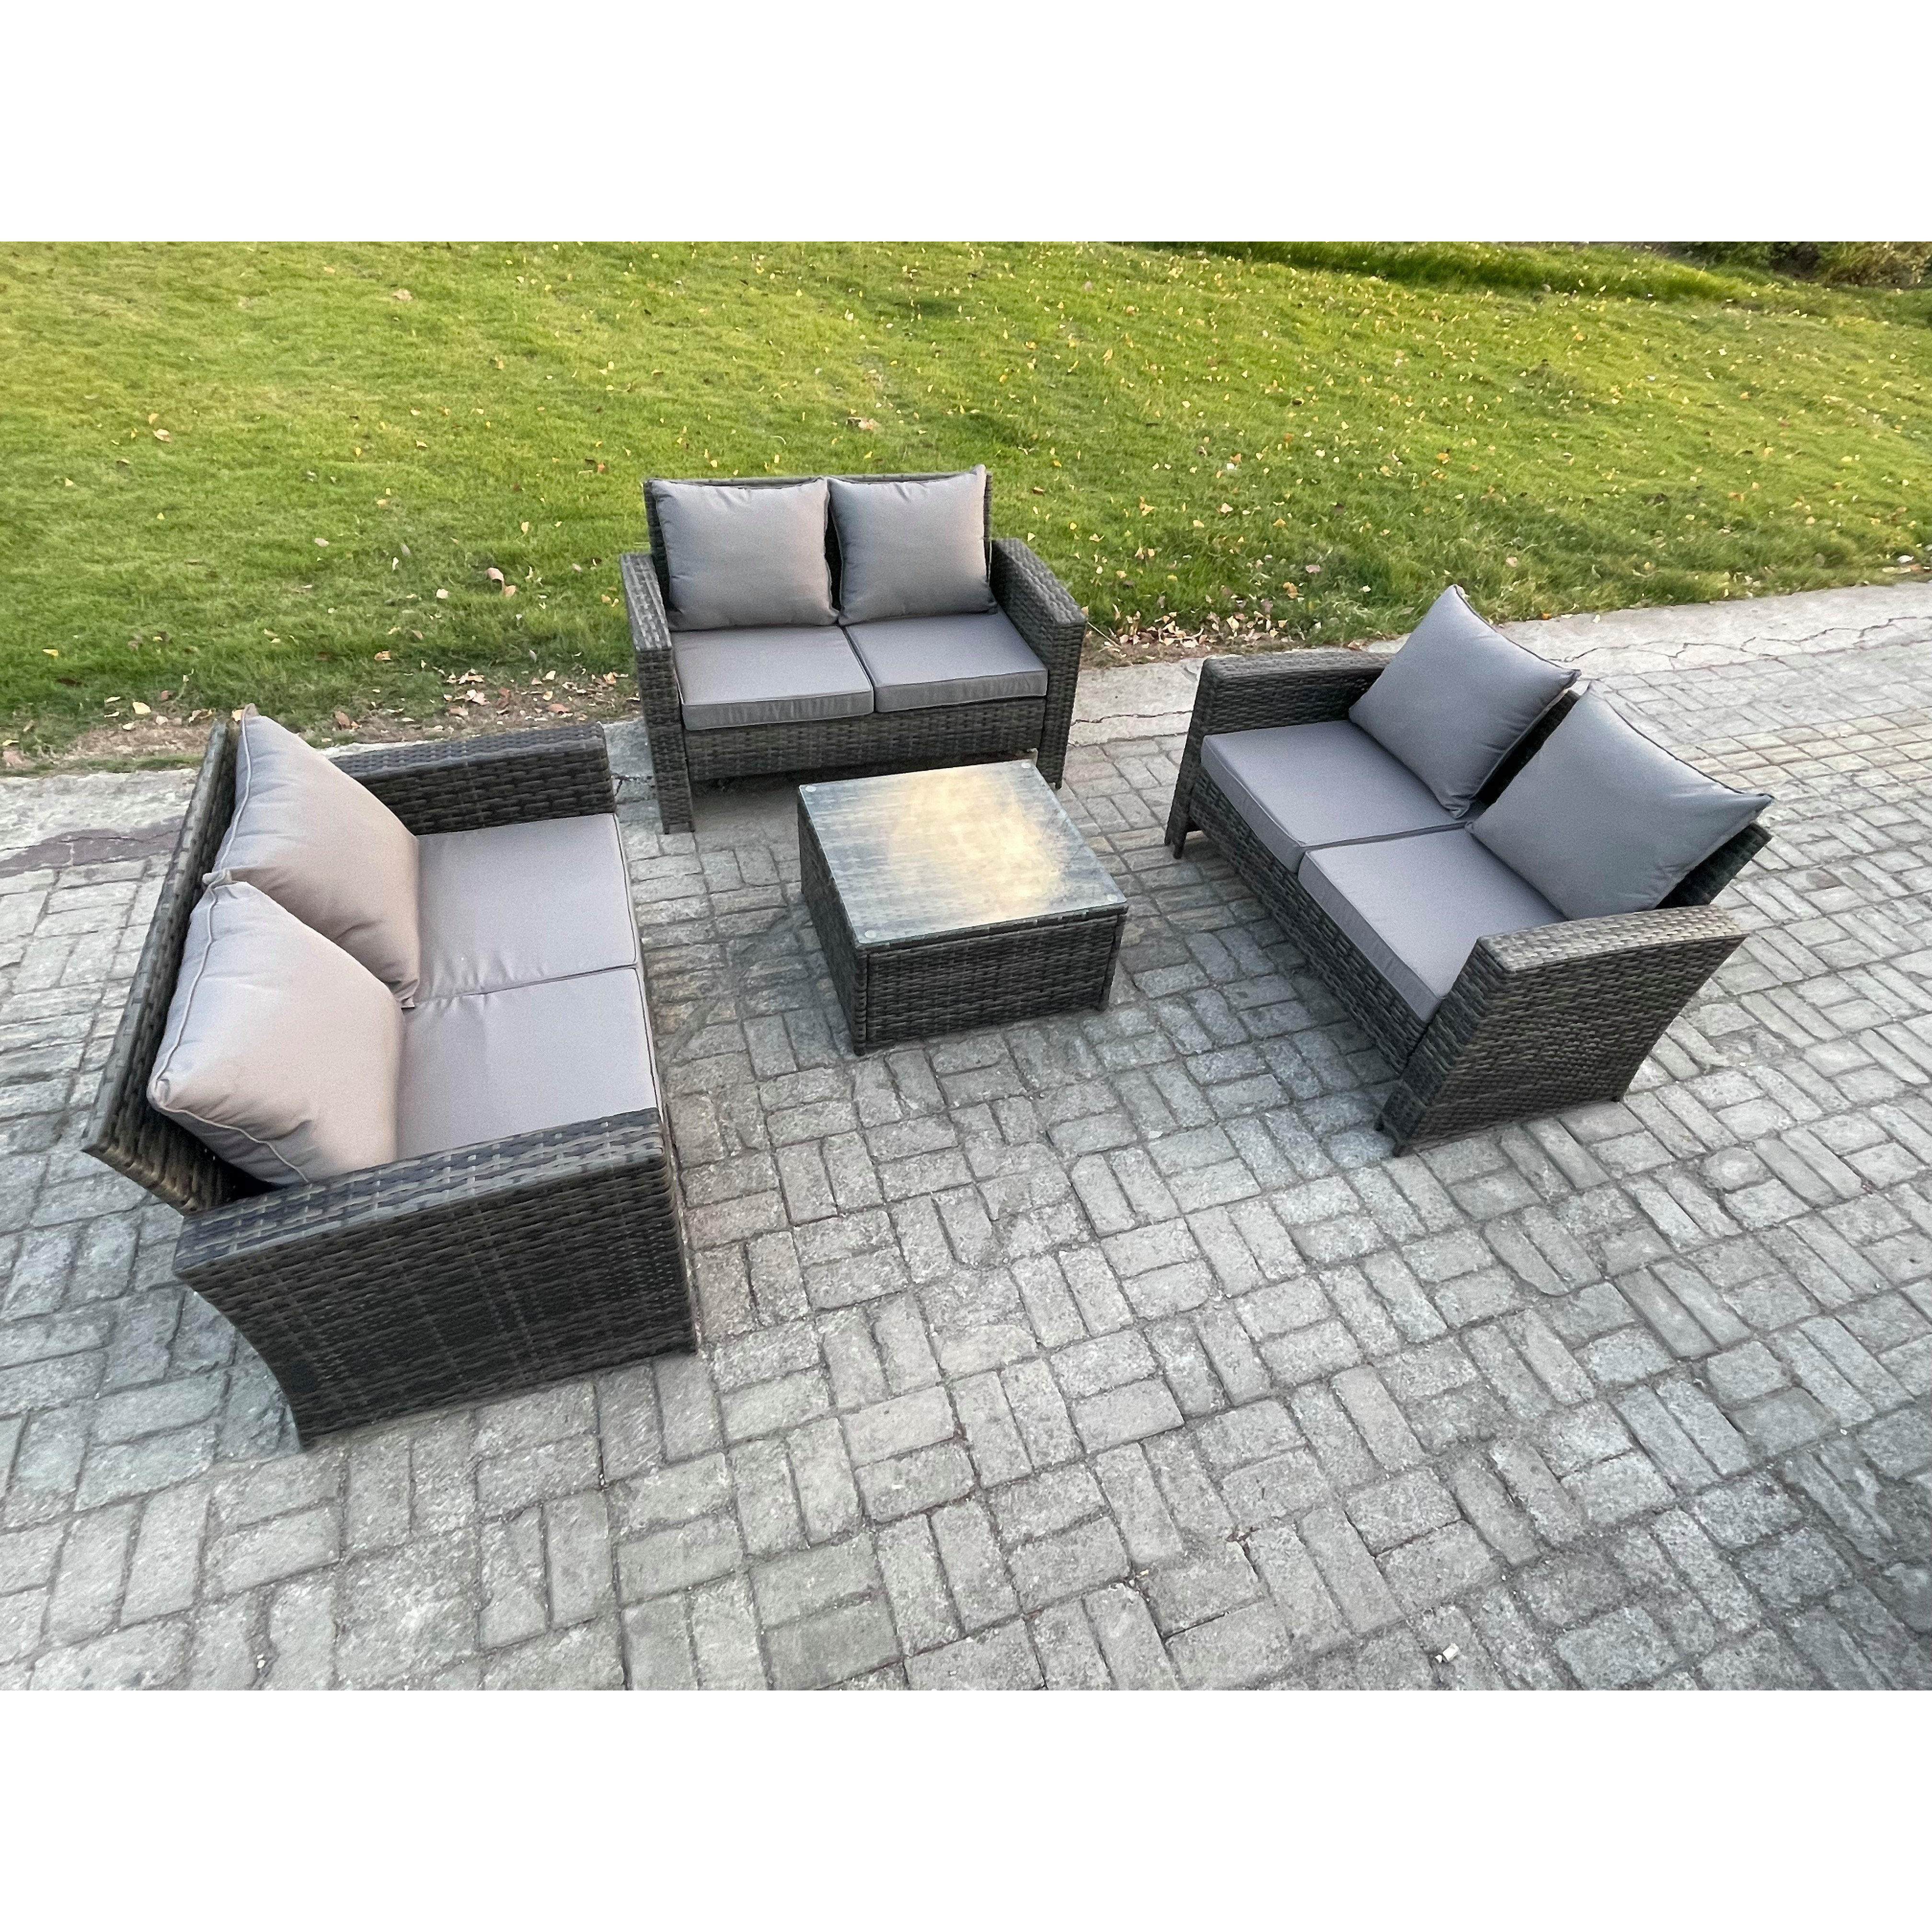 6 Seater Rattan Wicker Garden Furniture Patio Conservatory Sofa Set with Square Coffee Table Double Seat Sofa - image 1